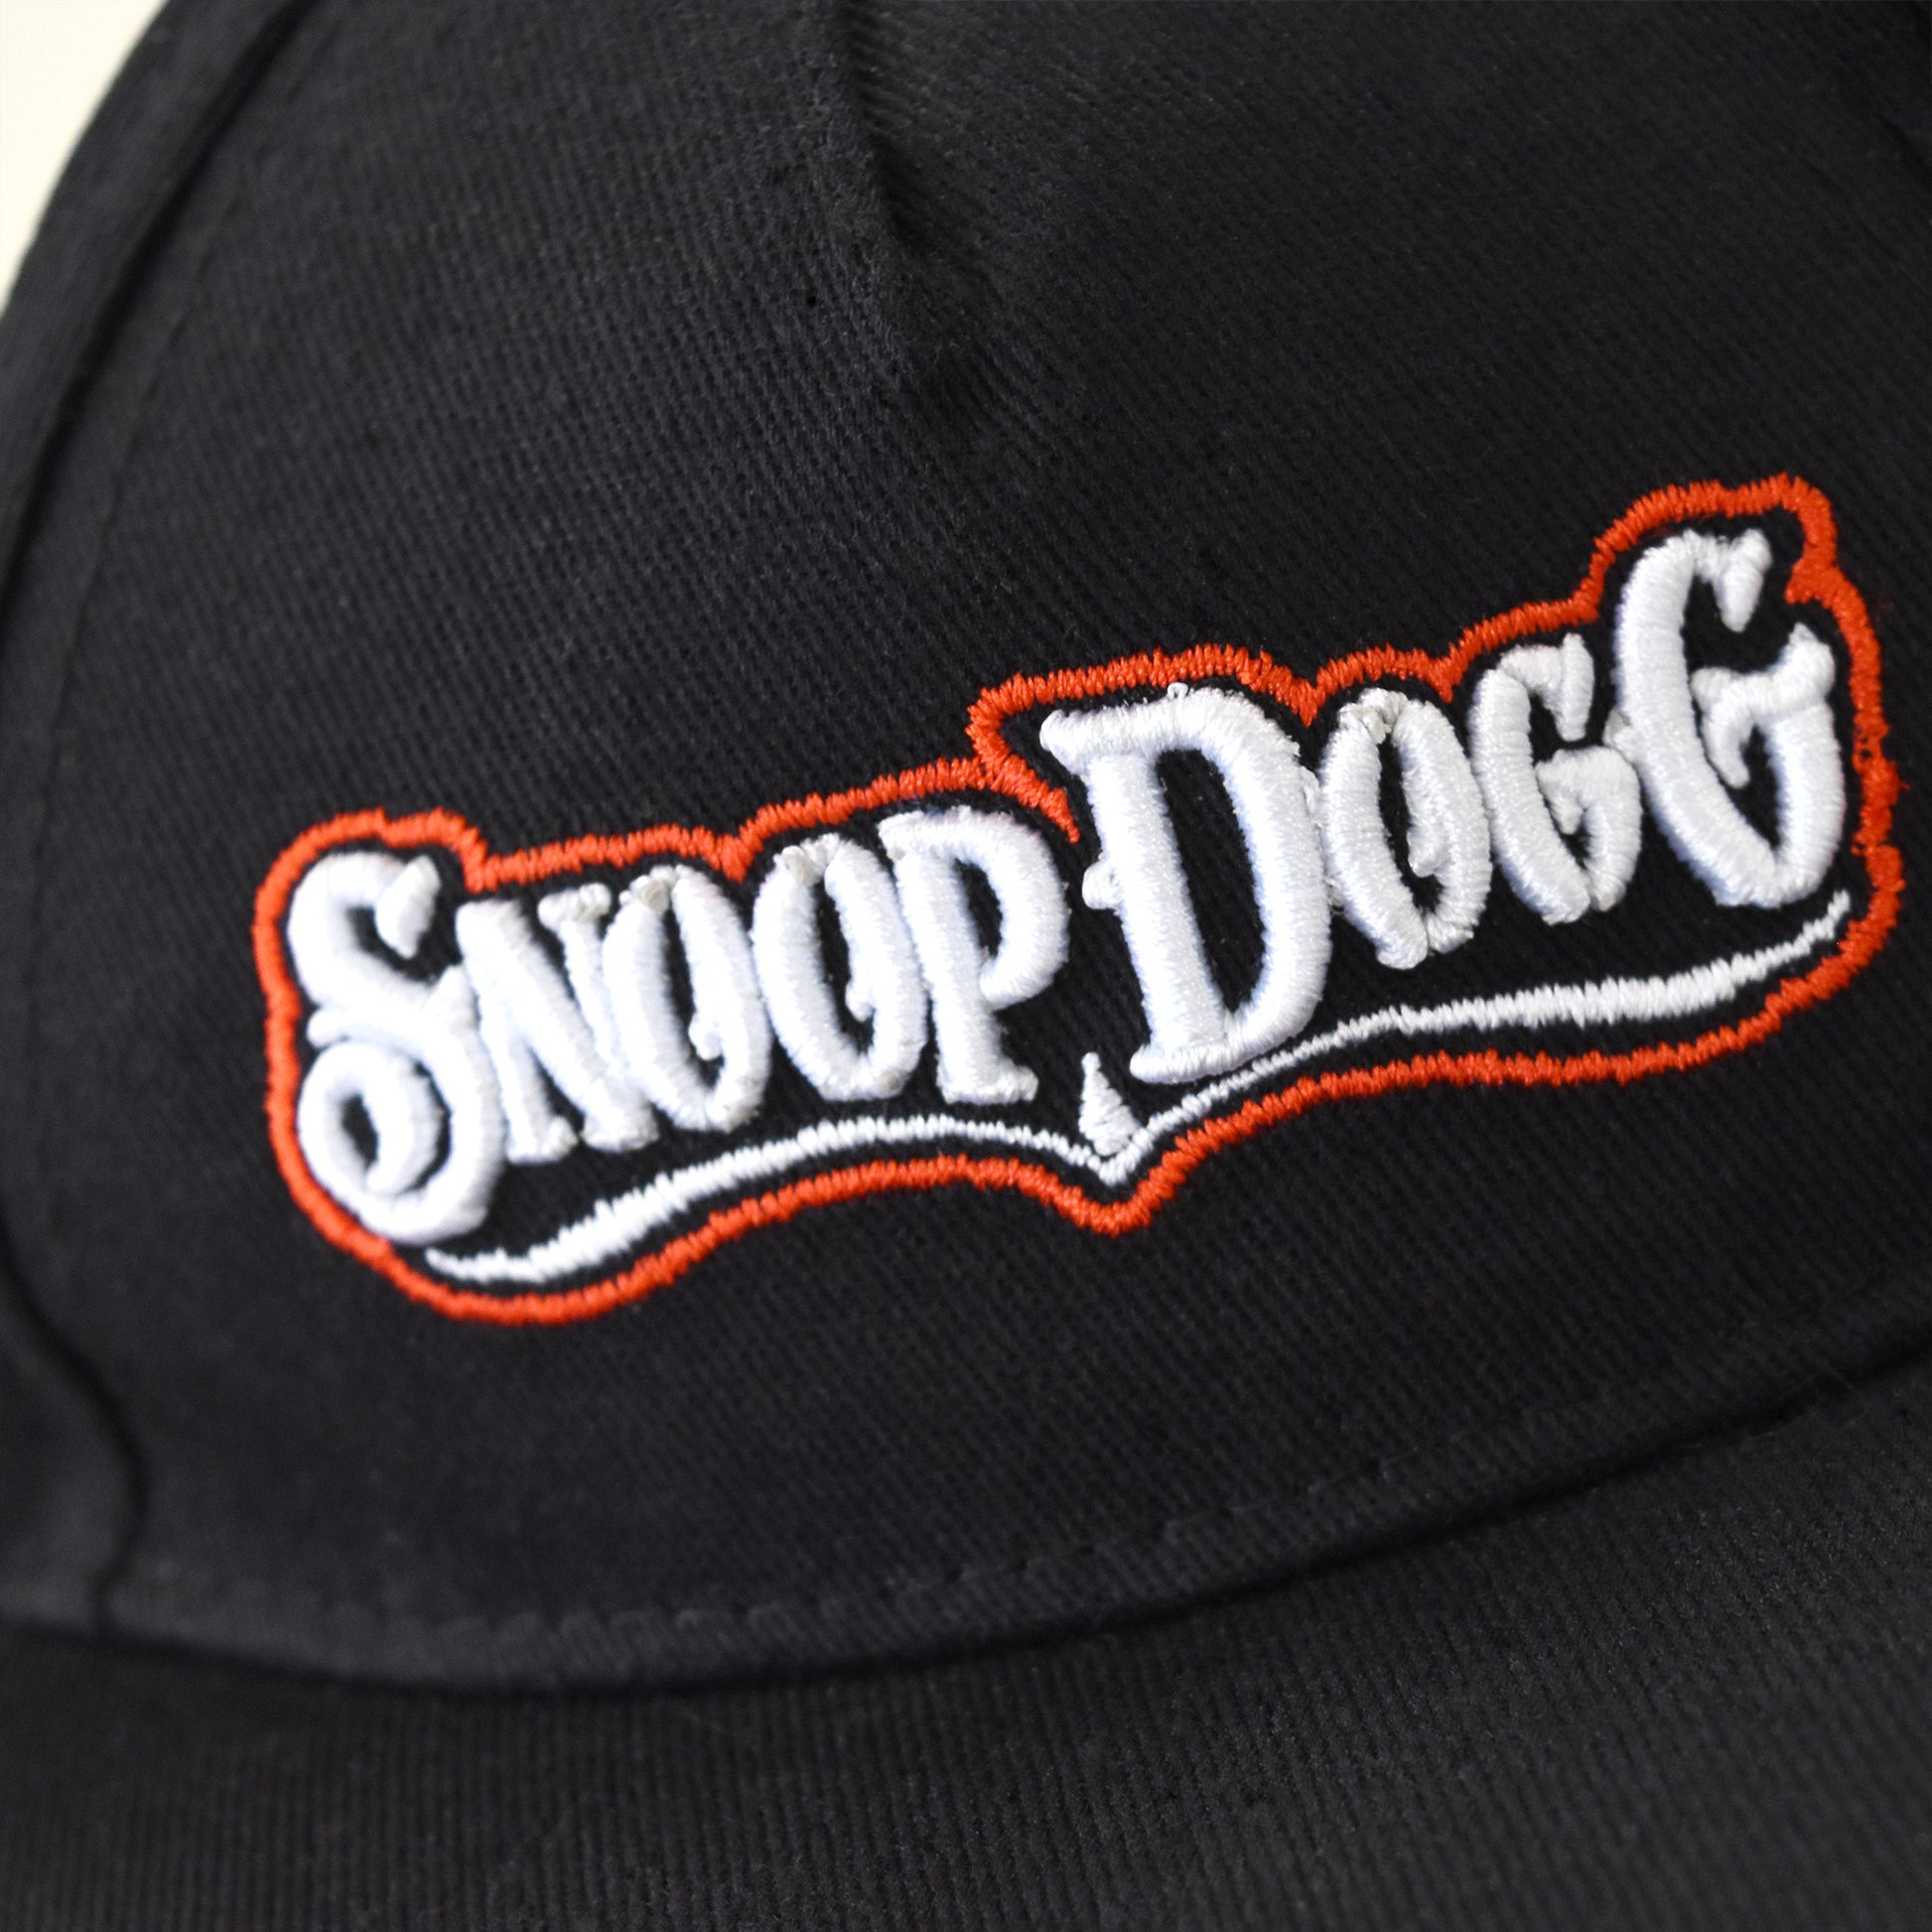 A close up detail image showing the puff embroidered Snoop Dogg wordmark on the Classic Snoop Deluxe Pet Baseball Hat.